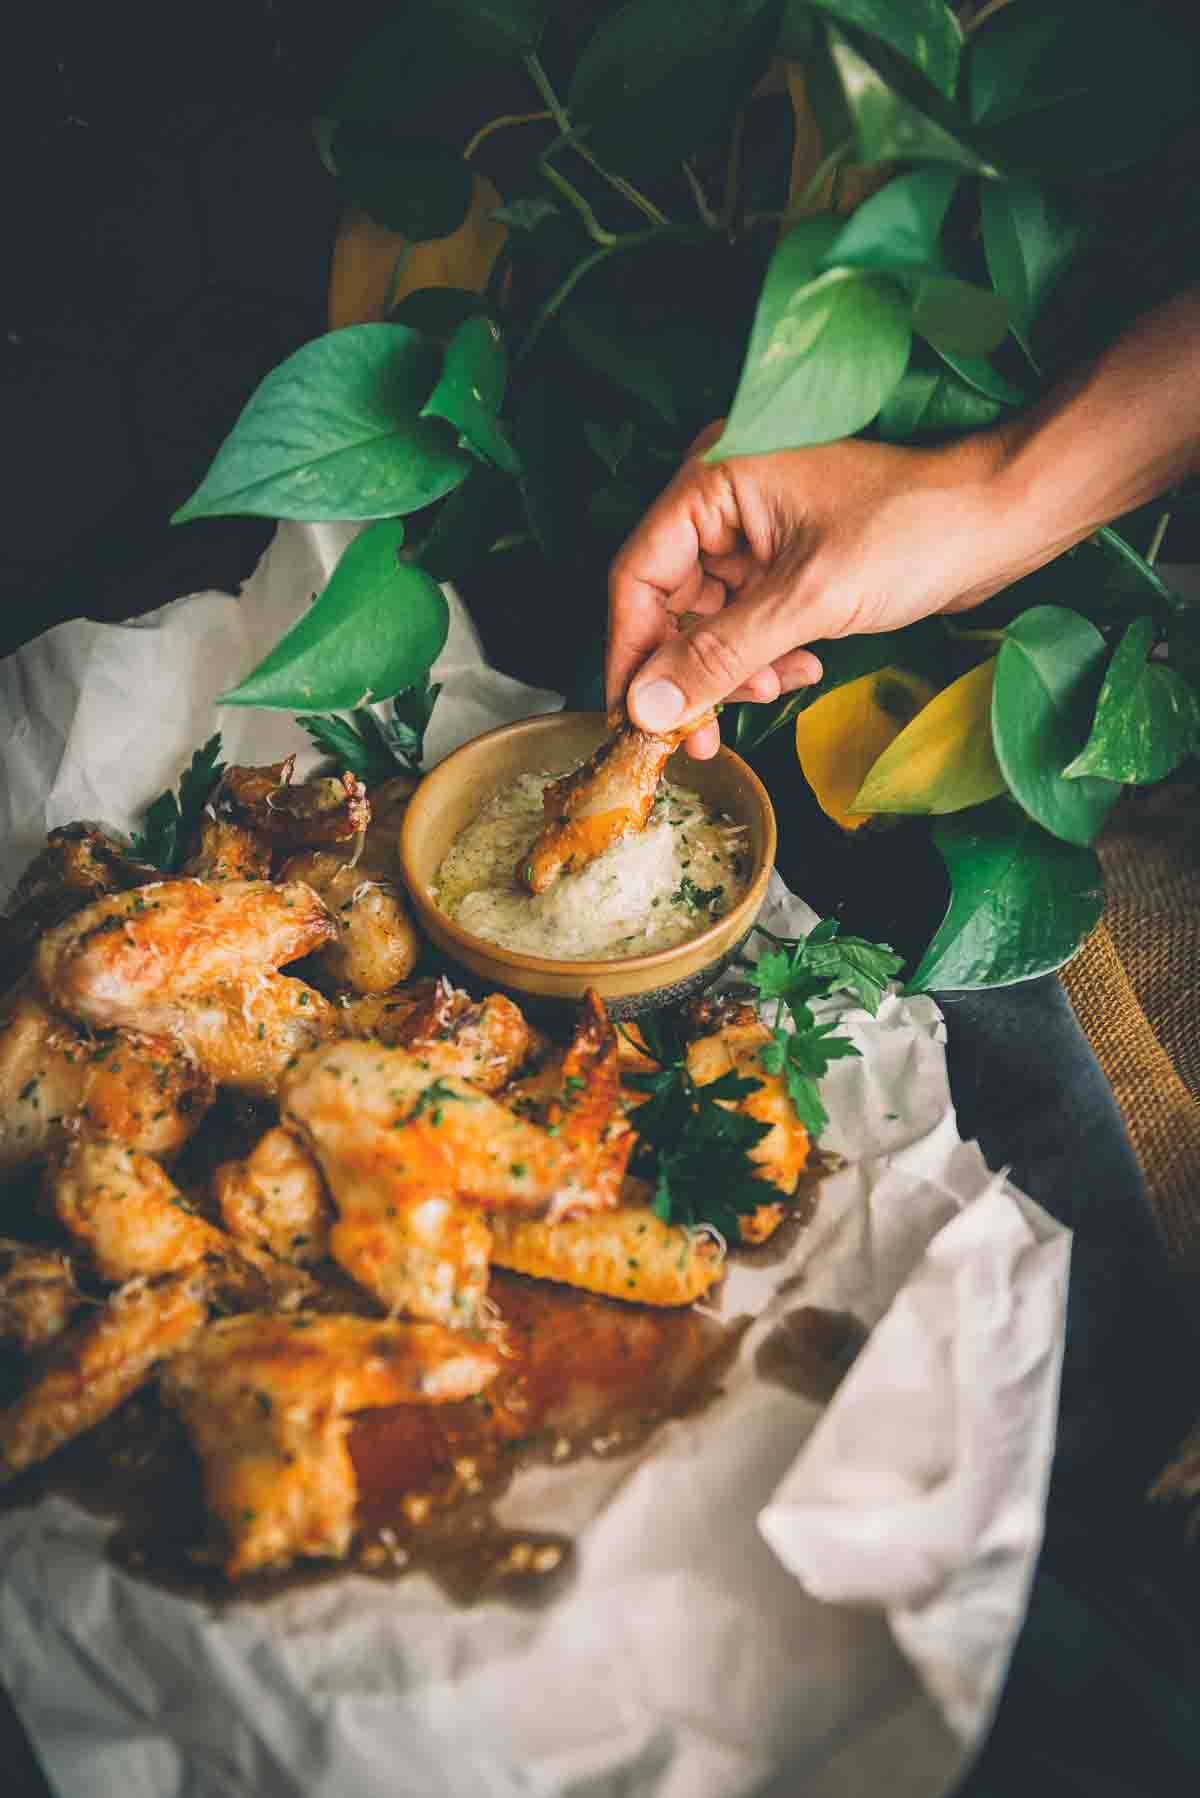 Hand dipping wing into garlic parm wing sauce.